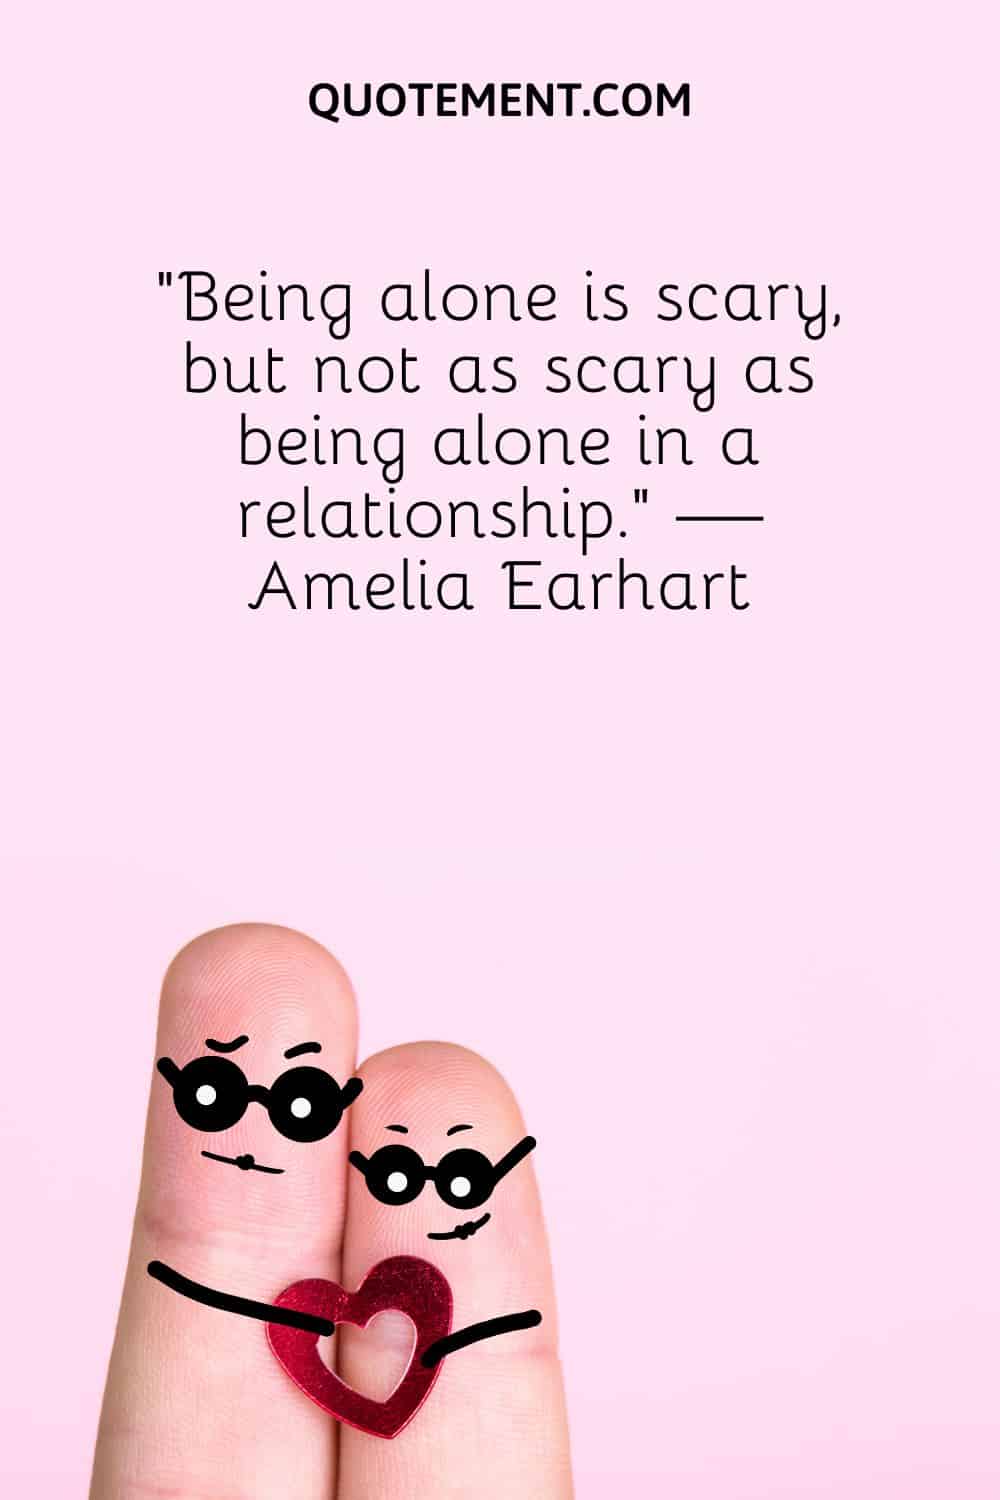 “Being alone is scary, but not as scary as being alone in a relationship.” — Amelia Earhart